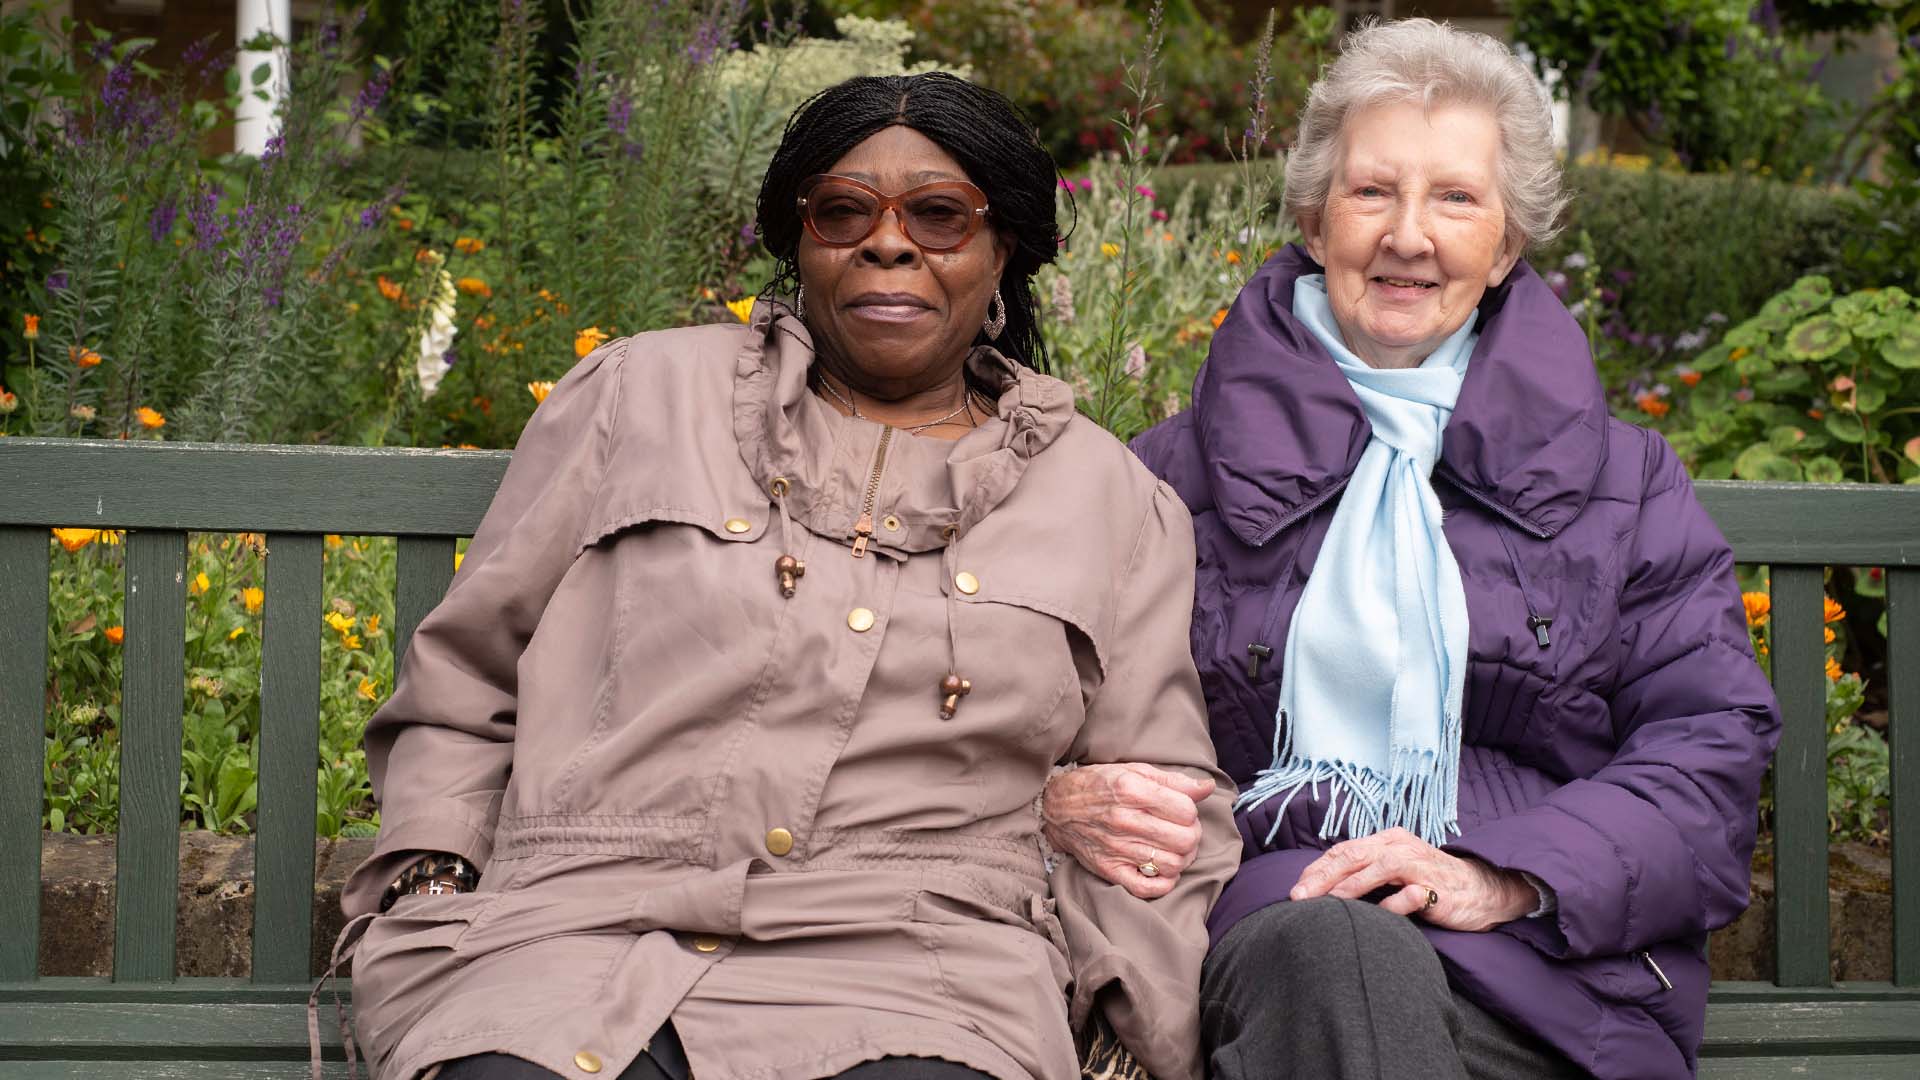 Two Woodstock court residents sat next to each other on a long bench